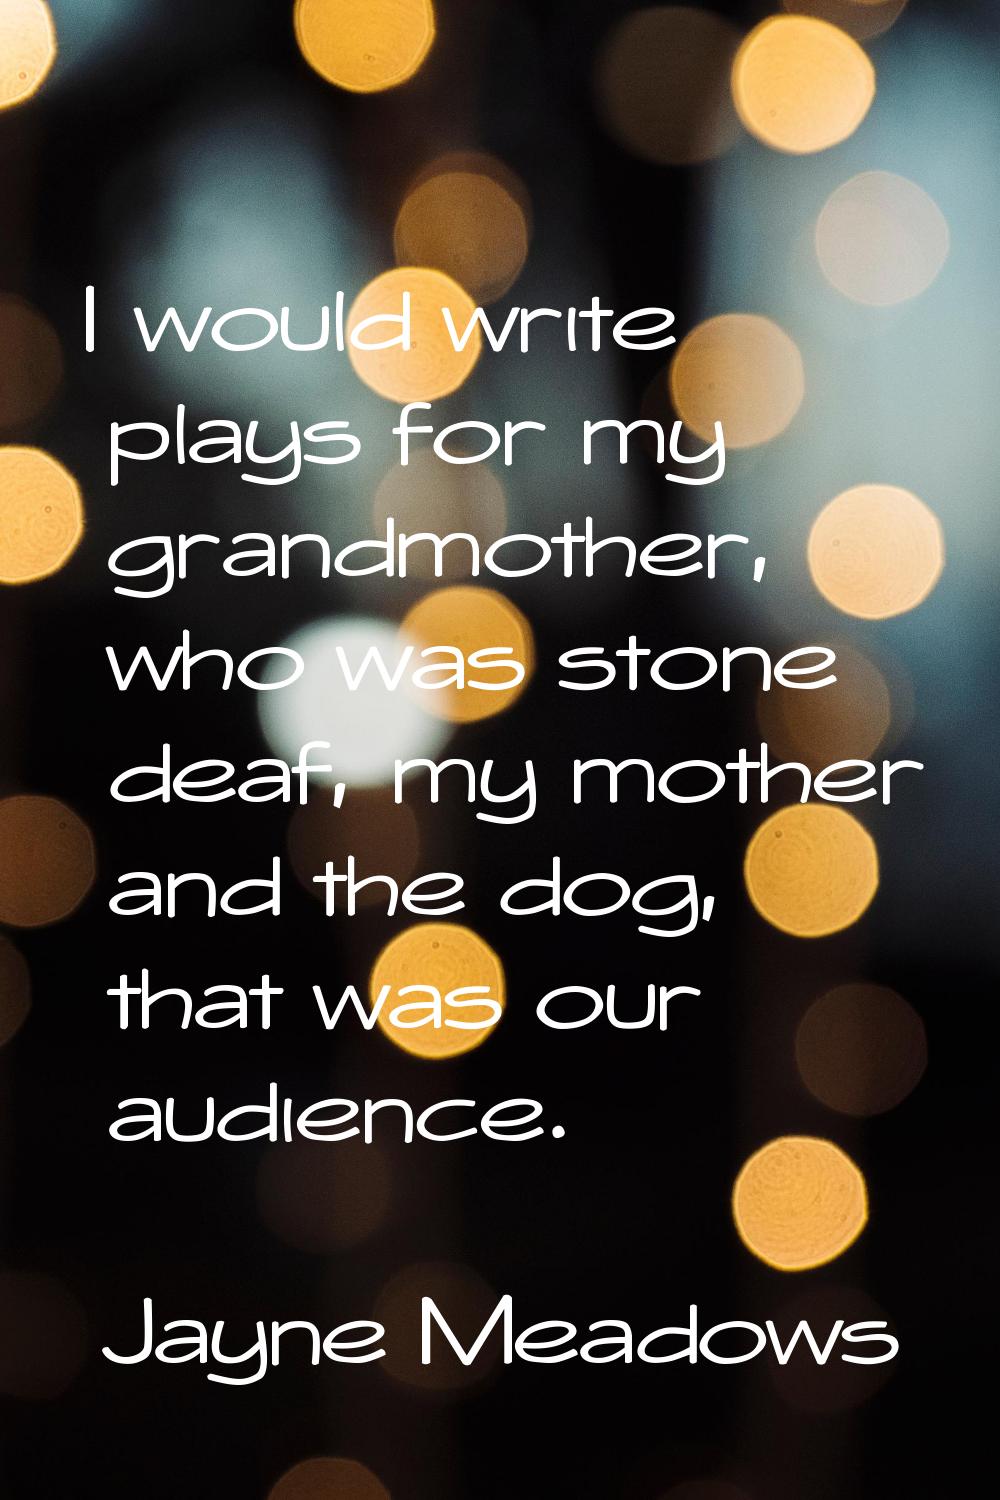 I would write plays for my grandmother, who was stone deaf, my mother and the dog, that was our aud